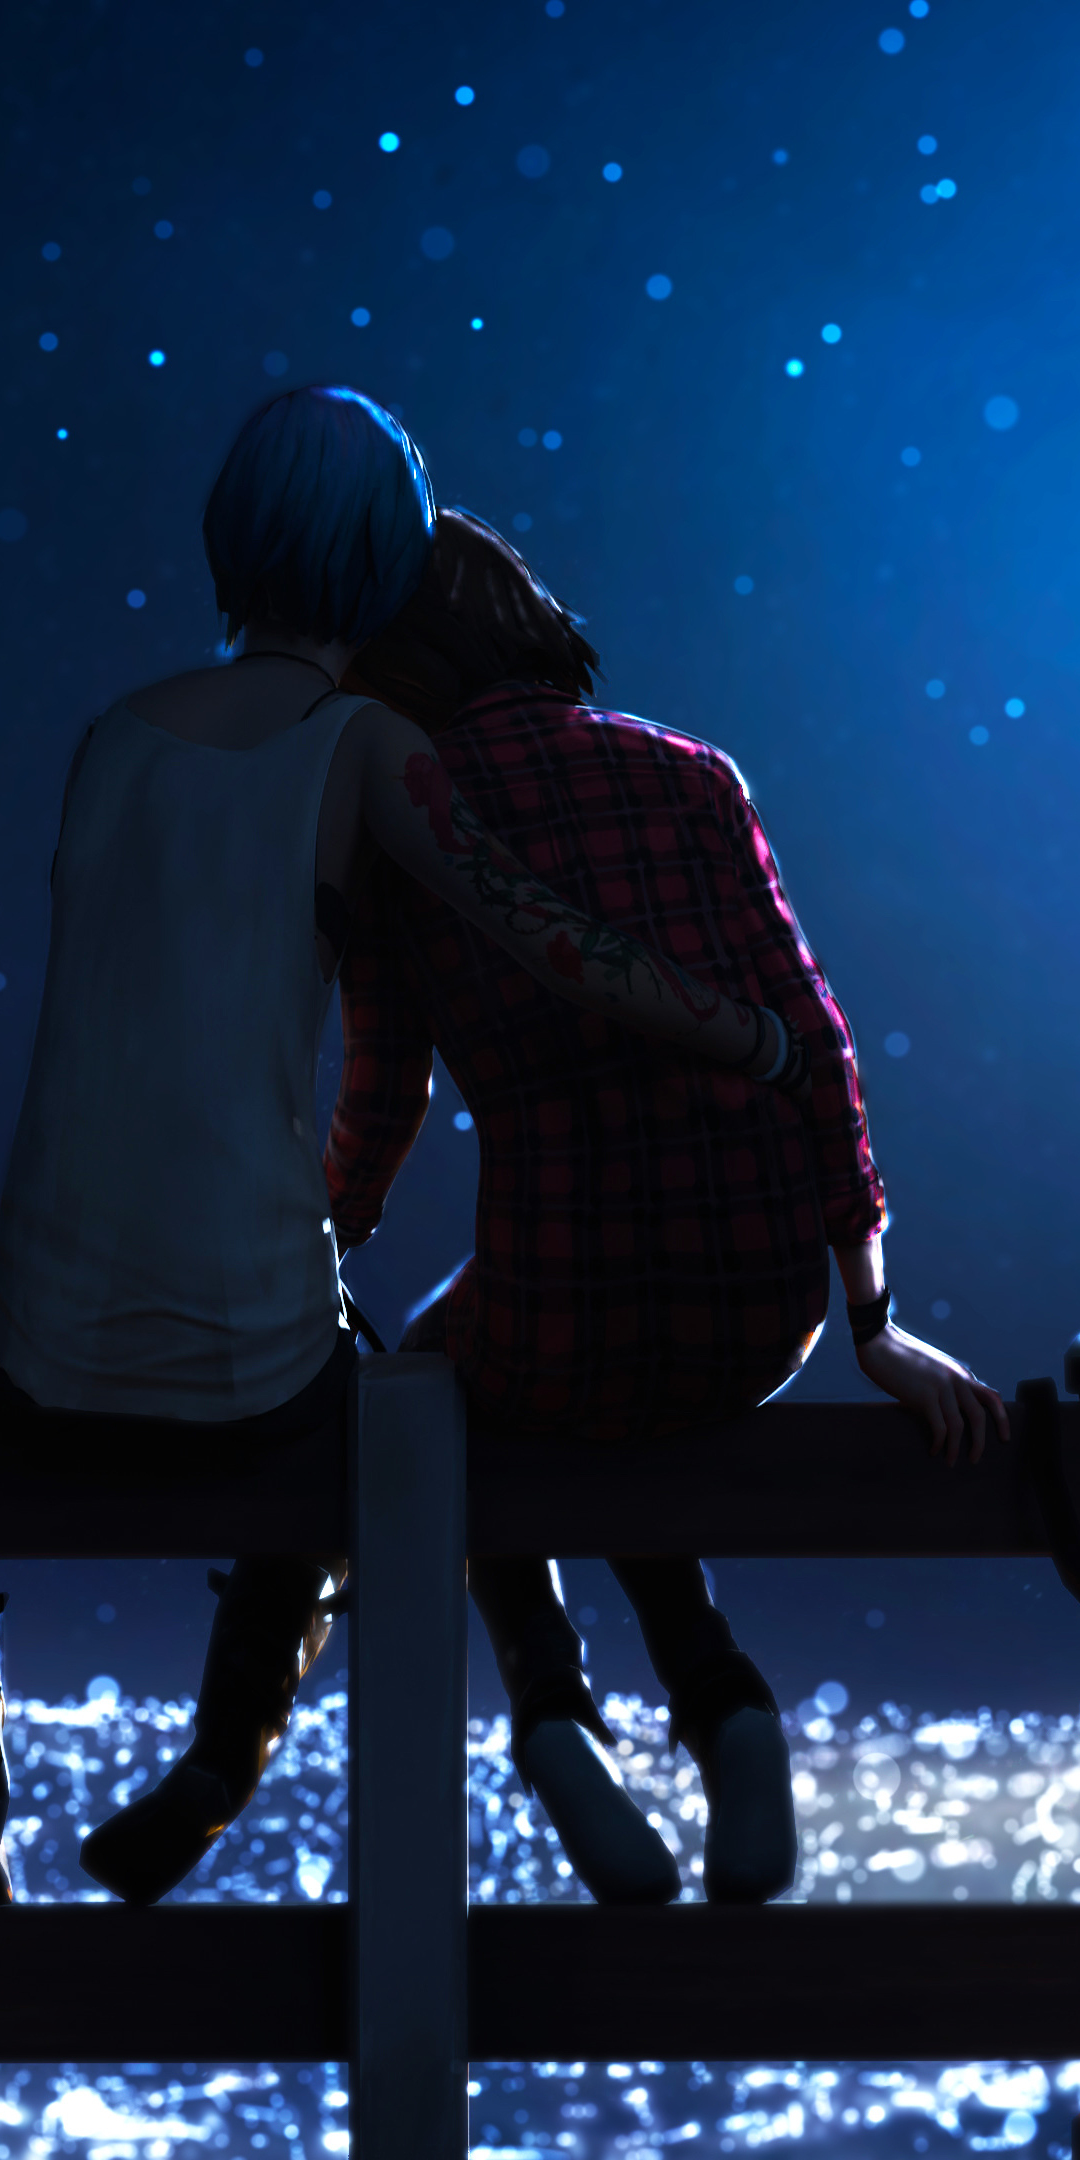 Outdoor, night, couple, video game, Life is strange, 1080x2160 wallpaper